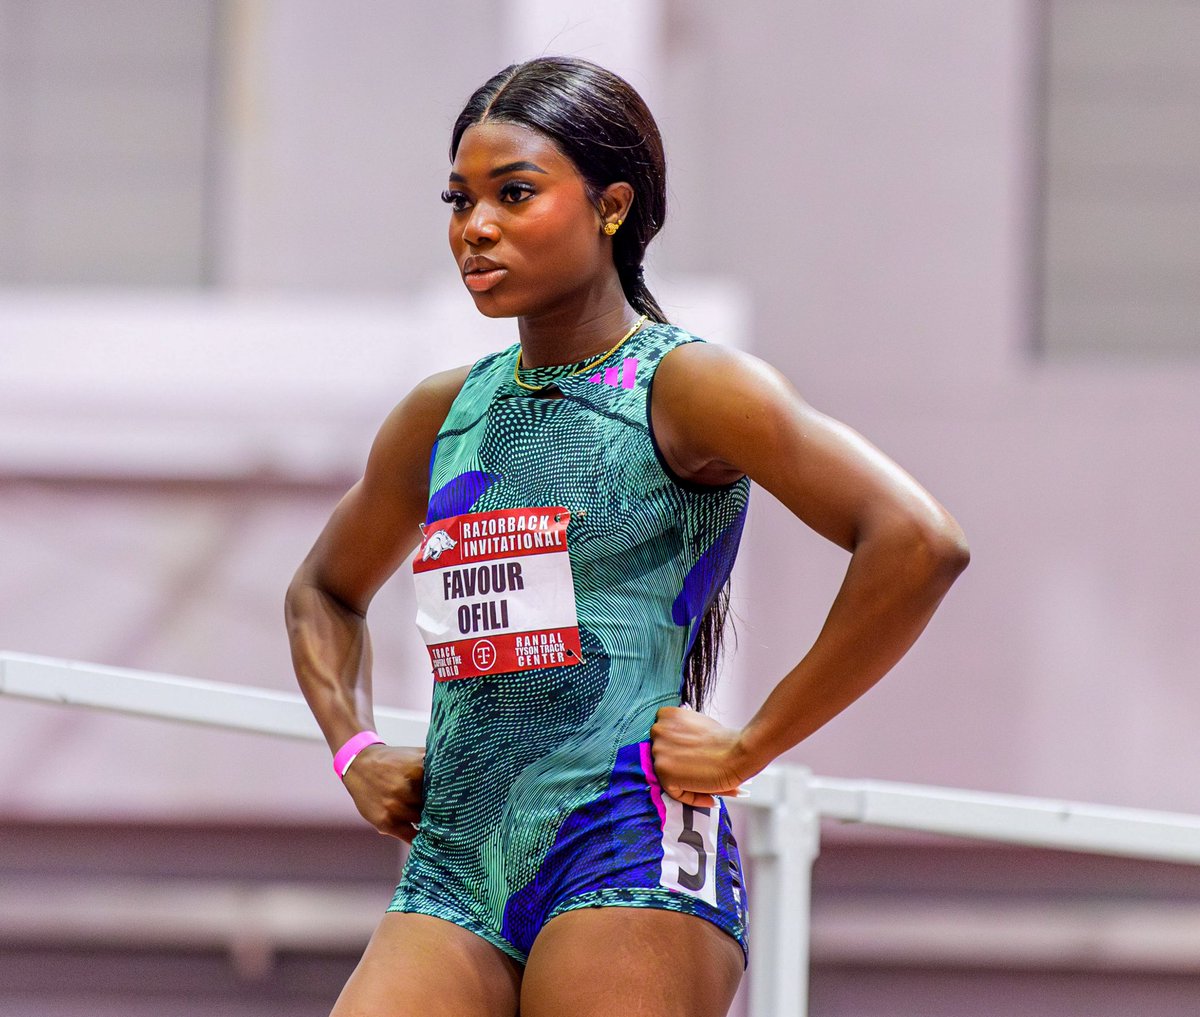 Favour Ofili 🇳🇬 clocked a time of 22.33s (1.4) to win the women's 200m at the Tom Jones Invitational in Florida! She beat Anavia Battle 🇺🇸 who ran 22.56s and Ida Karstoft 🇩🇰 in a new PB & National Record of 22.60s.